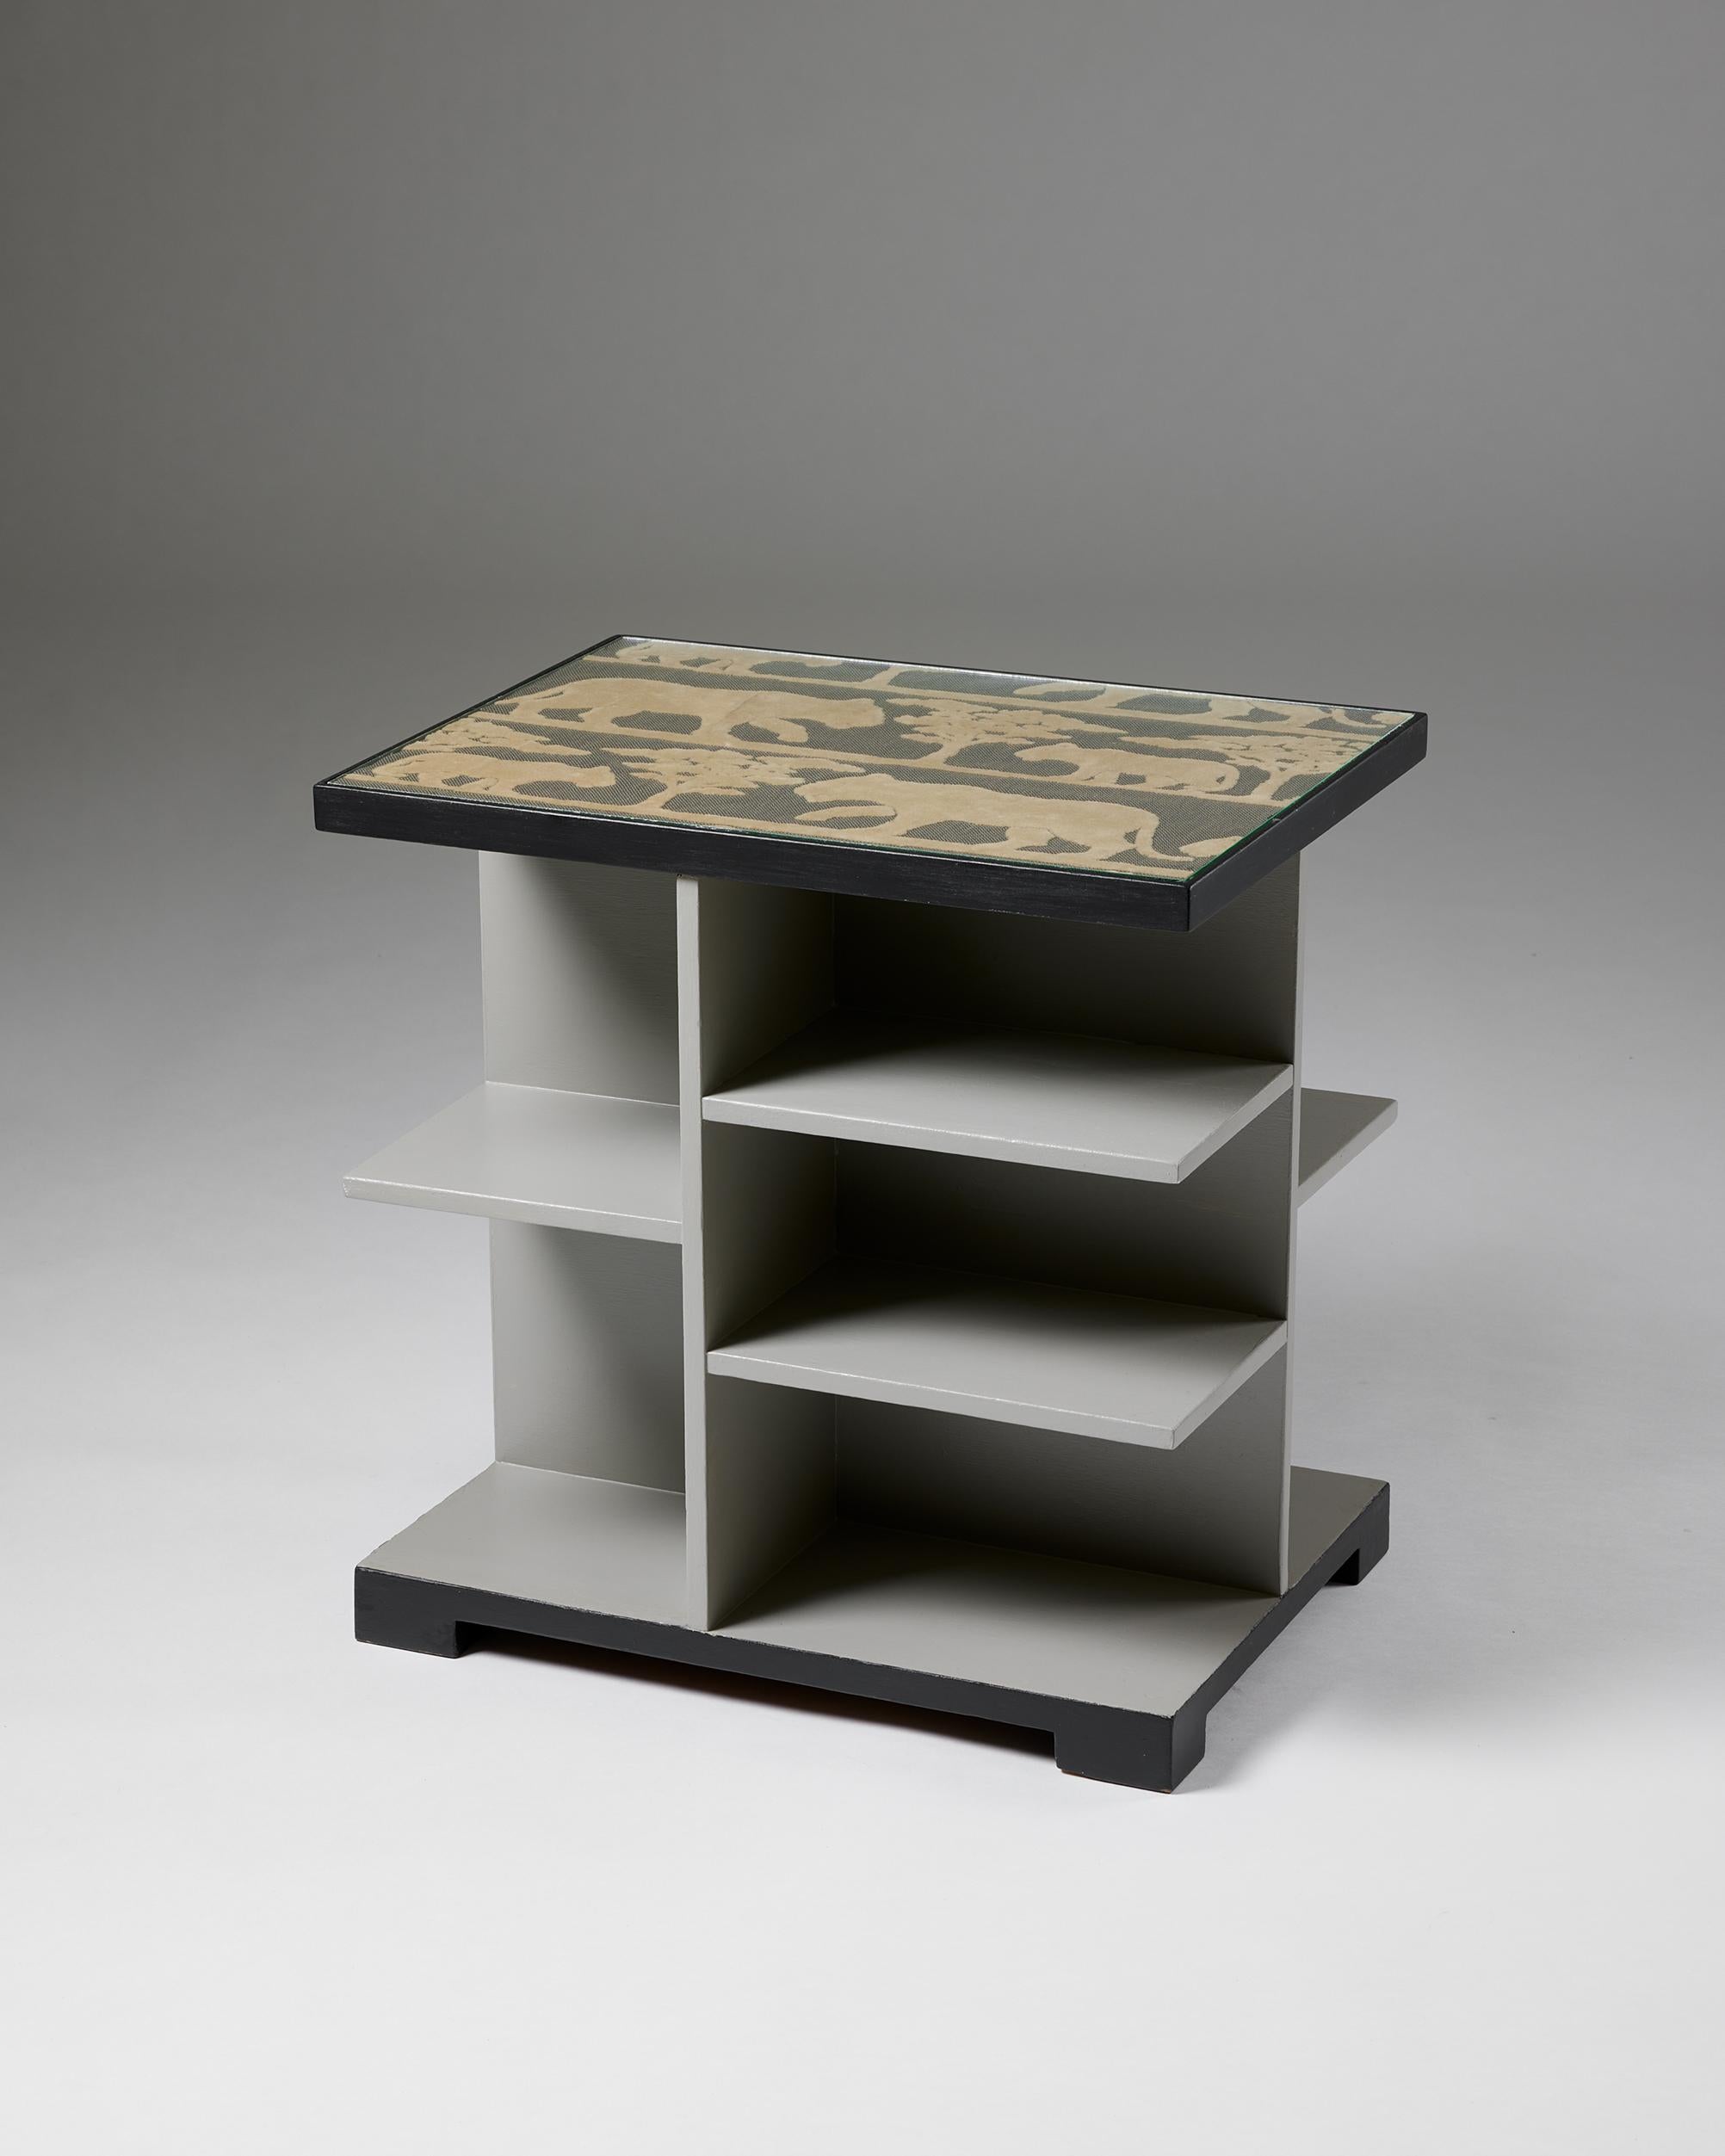 Side table, anonymous,
1940s.

Lacquered wood, textile, and glass.

H: 56 cm
W: 56 cm
D: 41.5 cm 